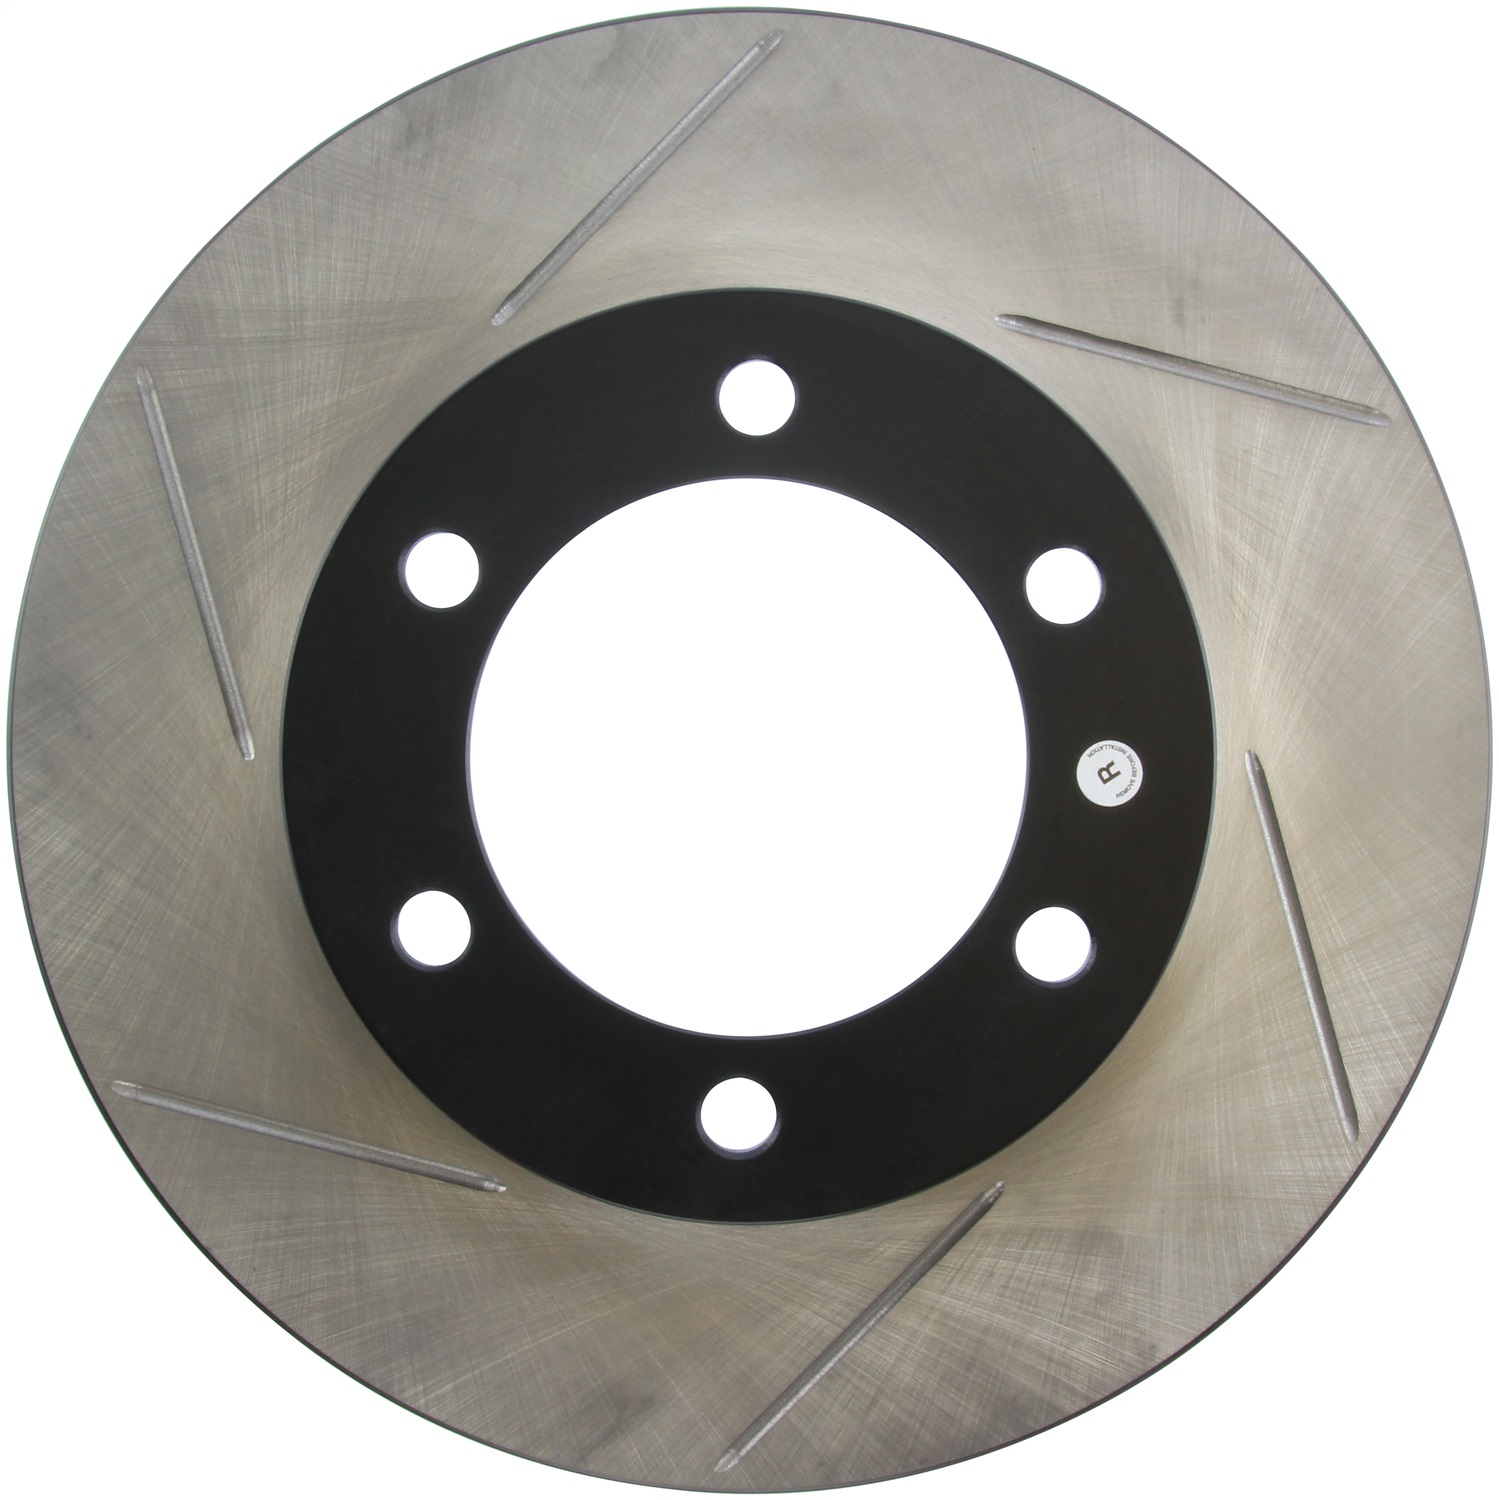 StopTech 126.44118SR Sport Slotted Disc Brake Rotor Fits 00-07 Sequoia Tundra